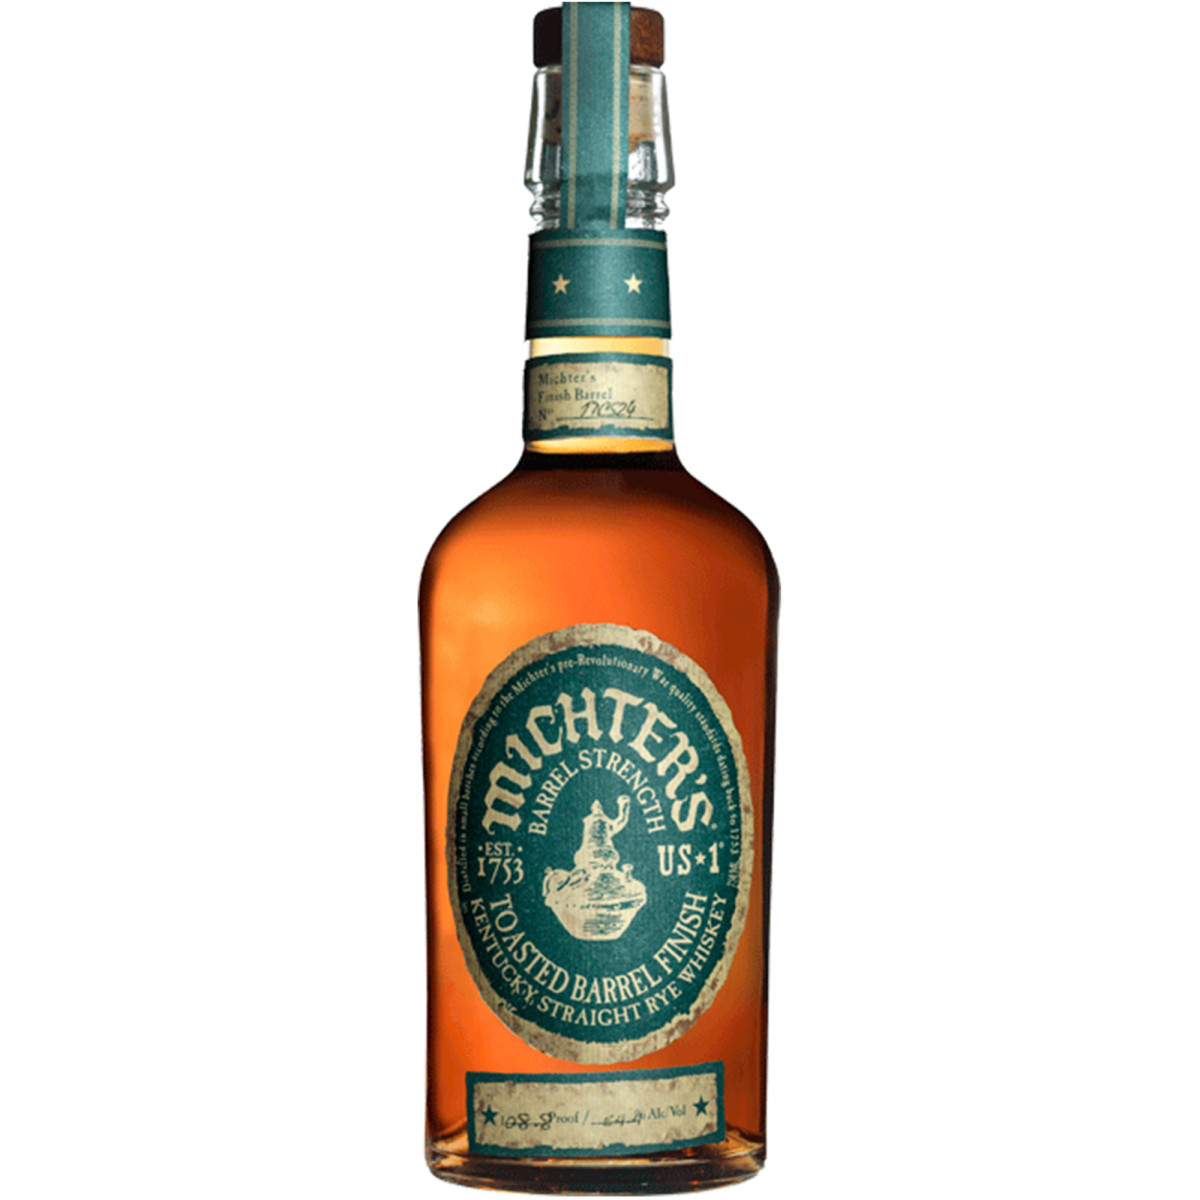 Michter's Toasted Barrel Finish